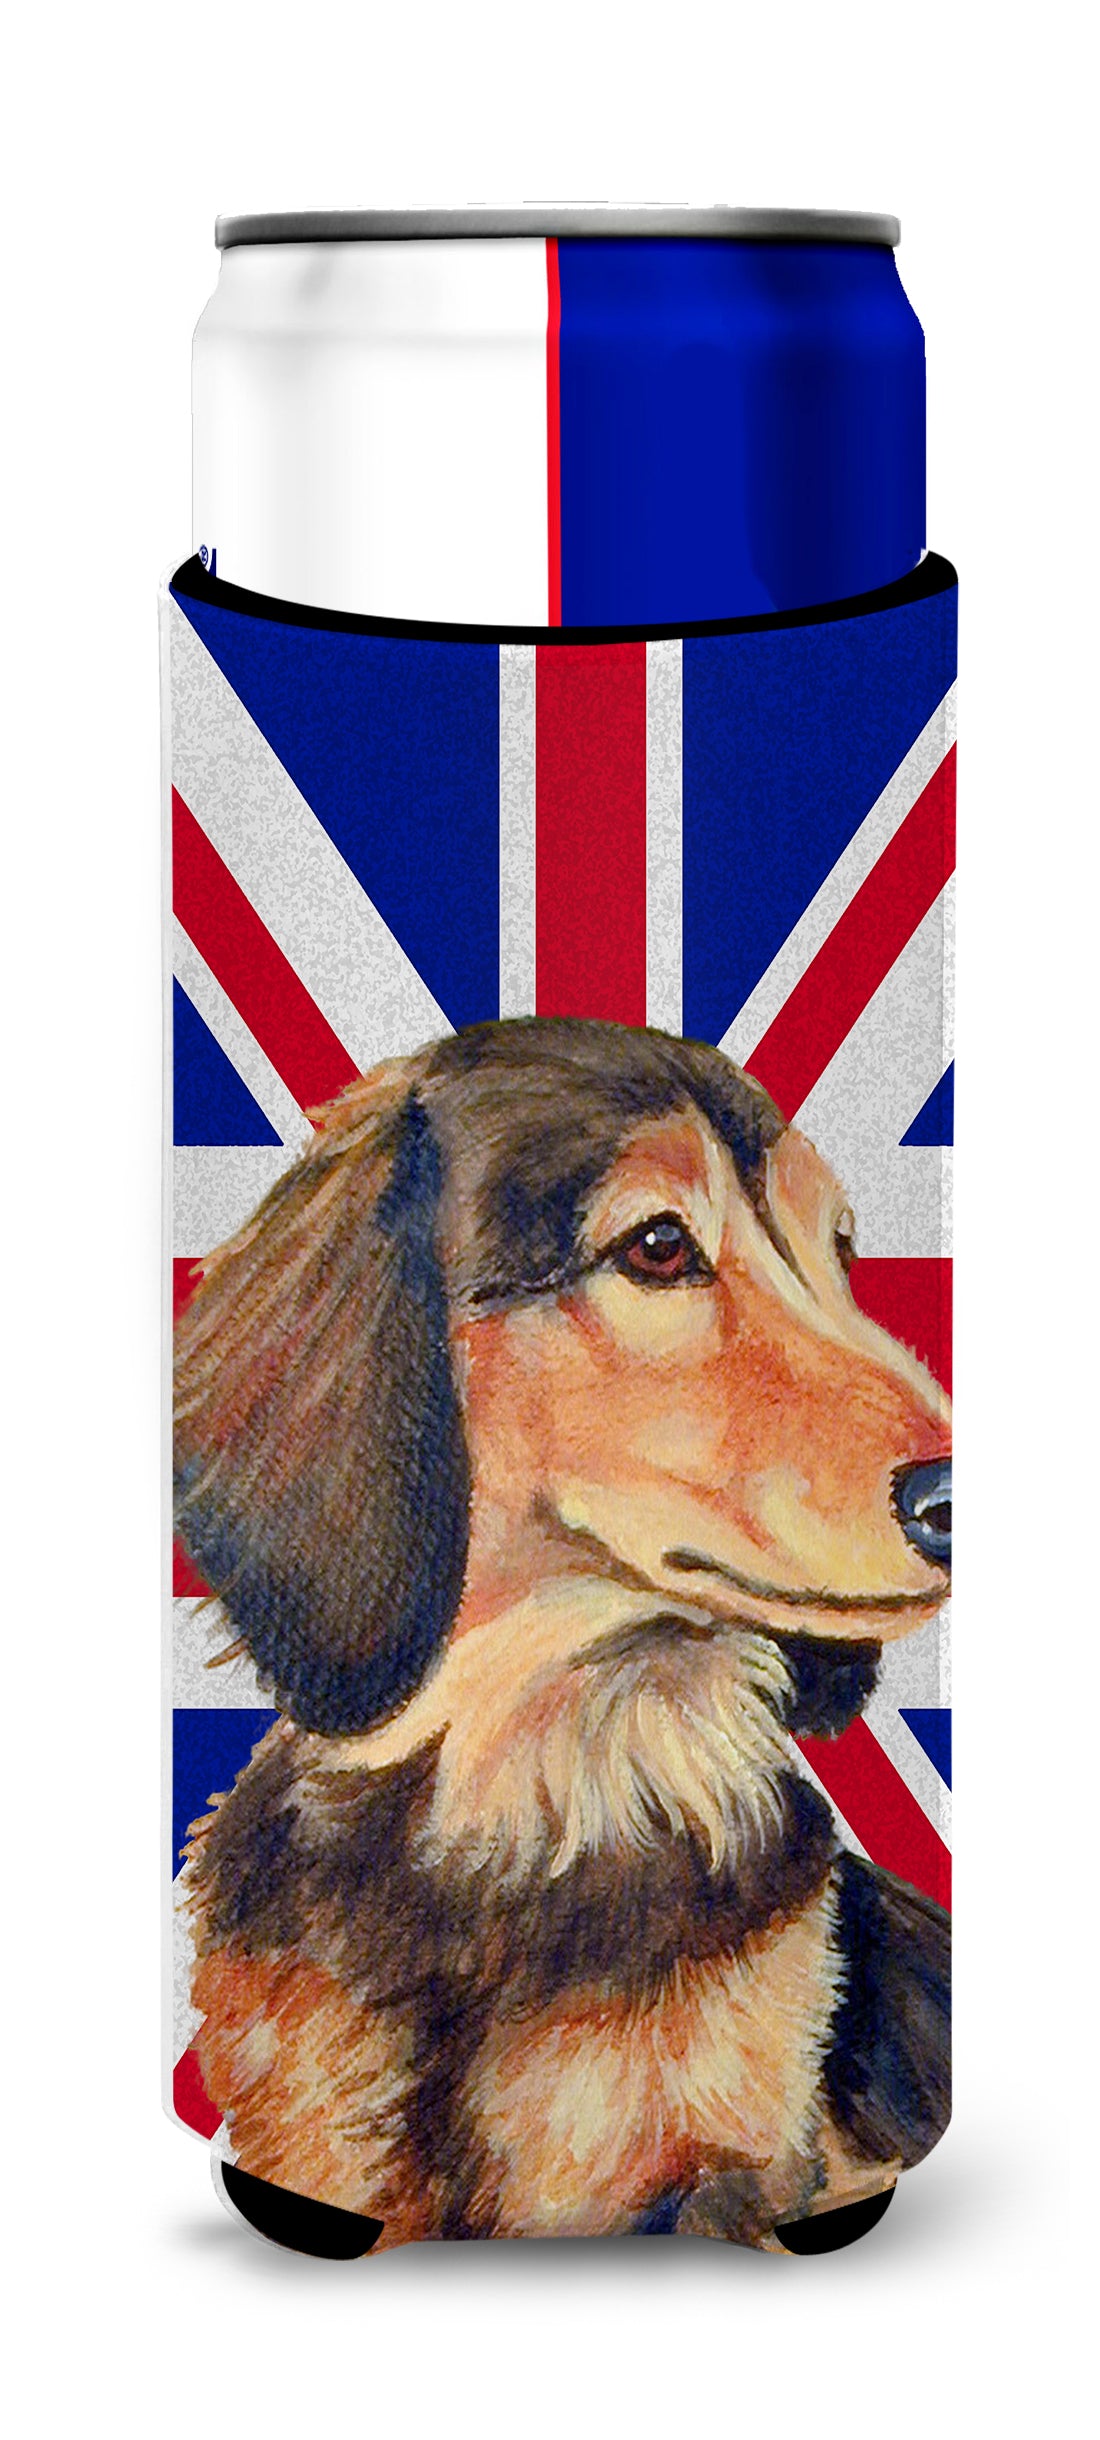 Dachshund with English Union Jack British Flag Ultra Beverage Insulators for slim cans LH9502MUK.